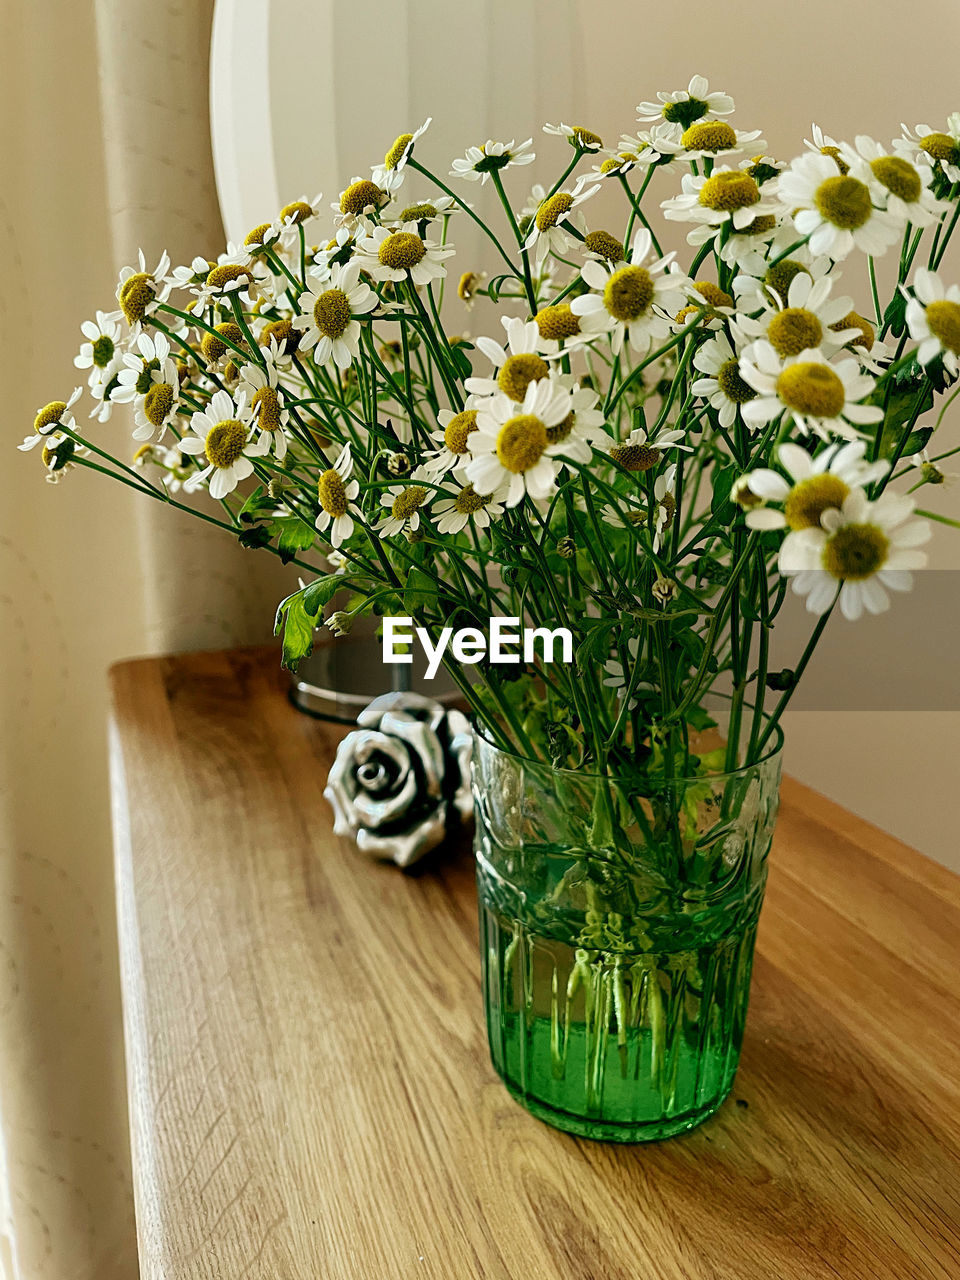 CLOSE-UP OF FLOWER VASE ON TABLE AGAINST WHITE WALL